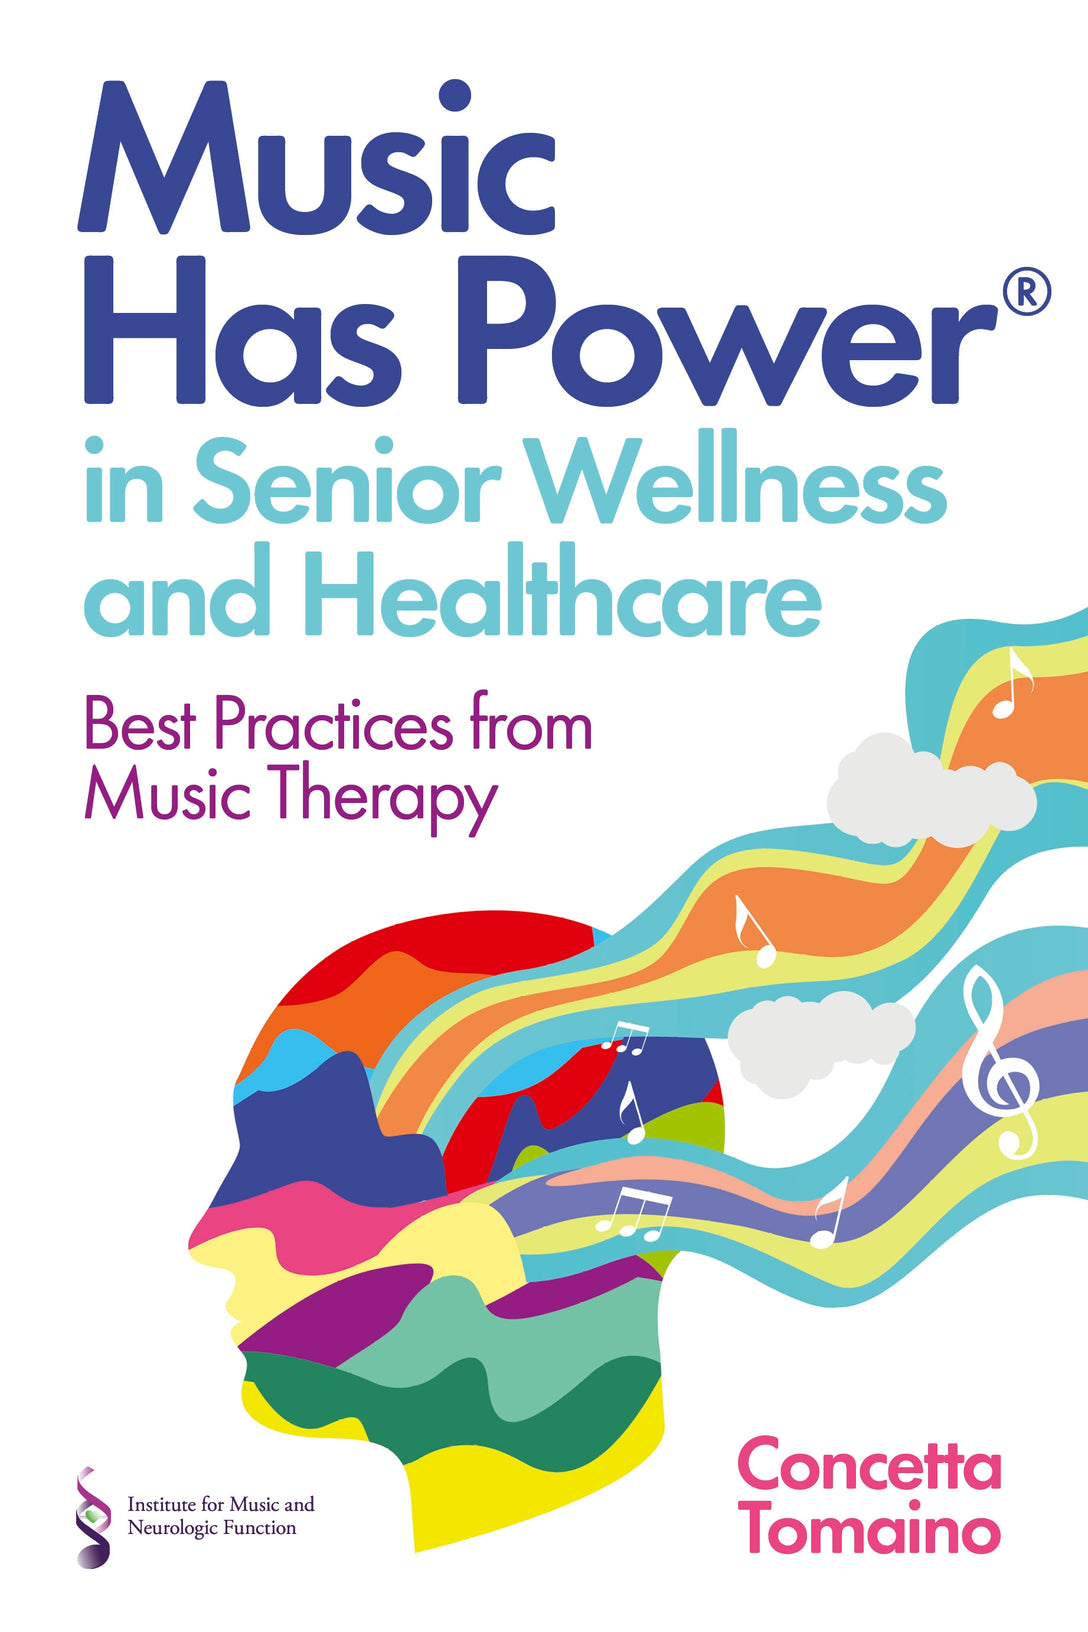 Music Has Power® in Senior Wellness and Healthcare by Concetta Tomaino